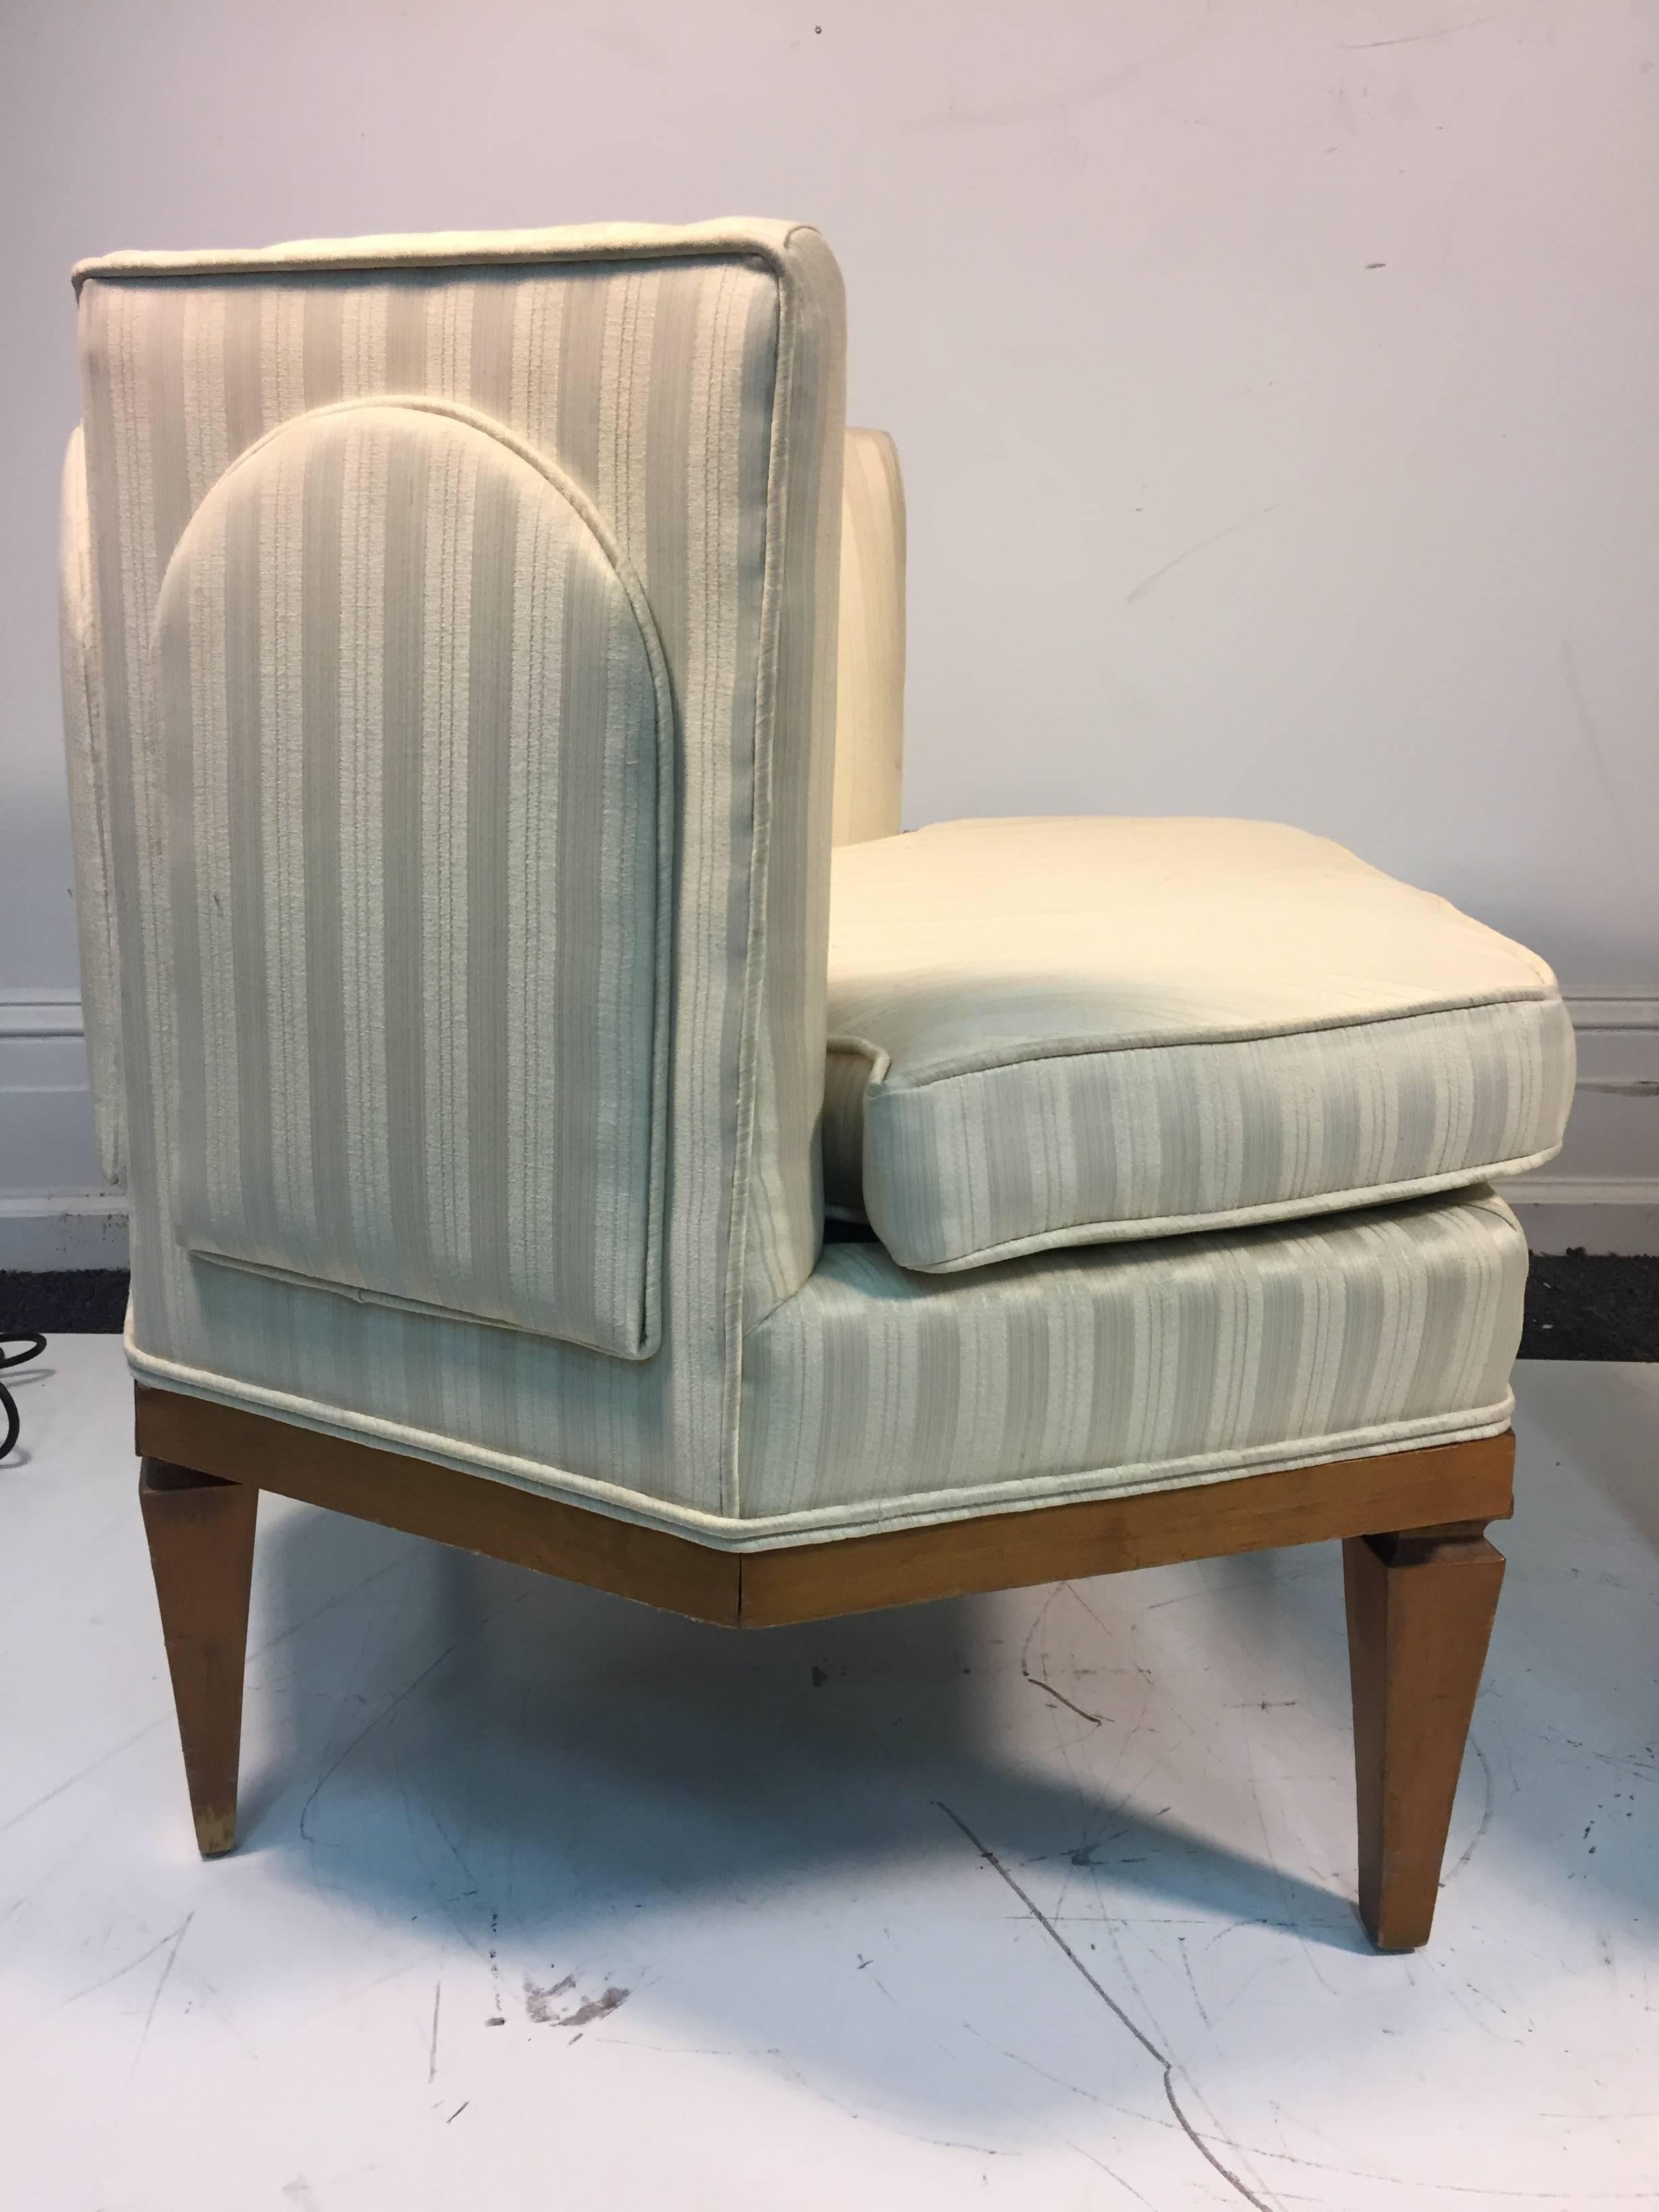 A rare pair of Hollywood Regency style club or slipper chairs in the manner of Tommi Parzinger. These chairs have an unusual design and are upholstered in their original striped satin fabric, circa 1960.